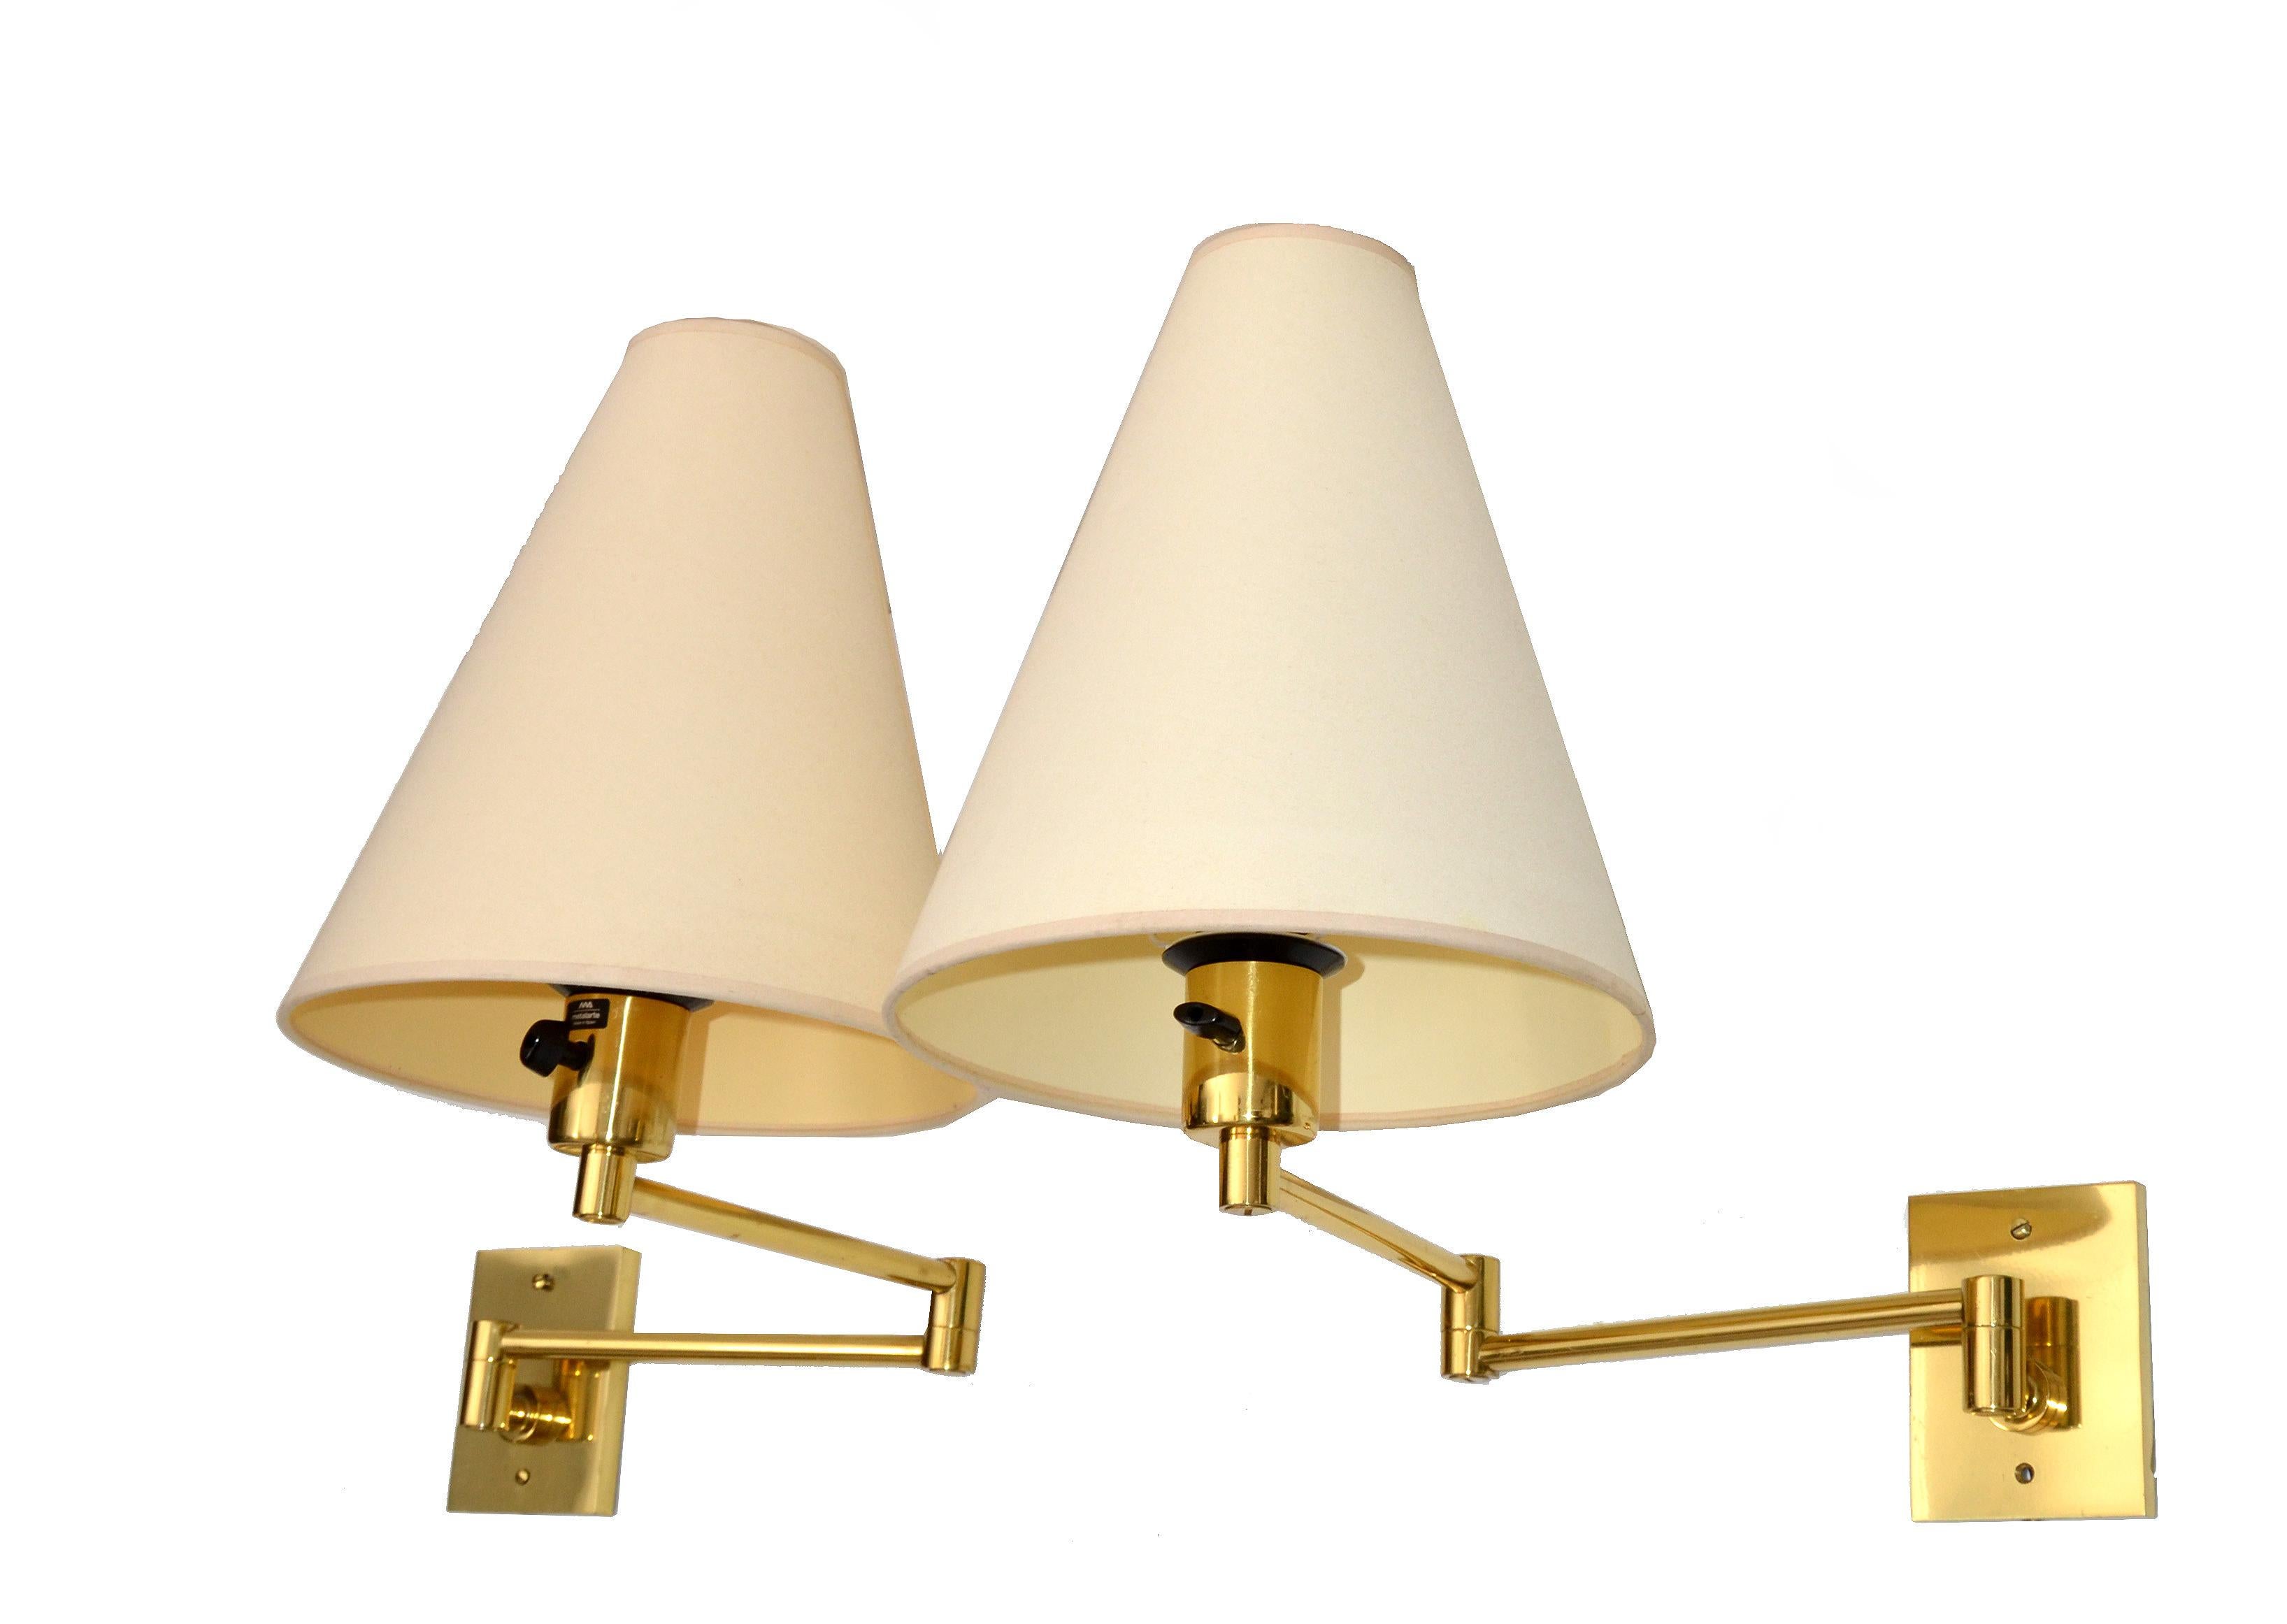 Pair of brass and metal Hansen lamps by Metalarte retractable sconces, wall lights.
Perfect working condition and each takes a max. 75 watts light bulb, LED works too.
Marked at the socket, Metalarte Spain & Hansen Lamps New York at the back